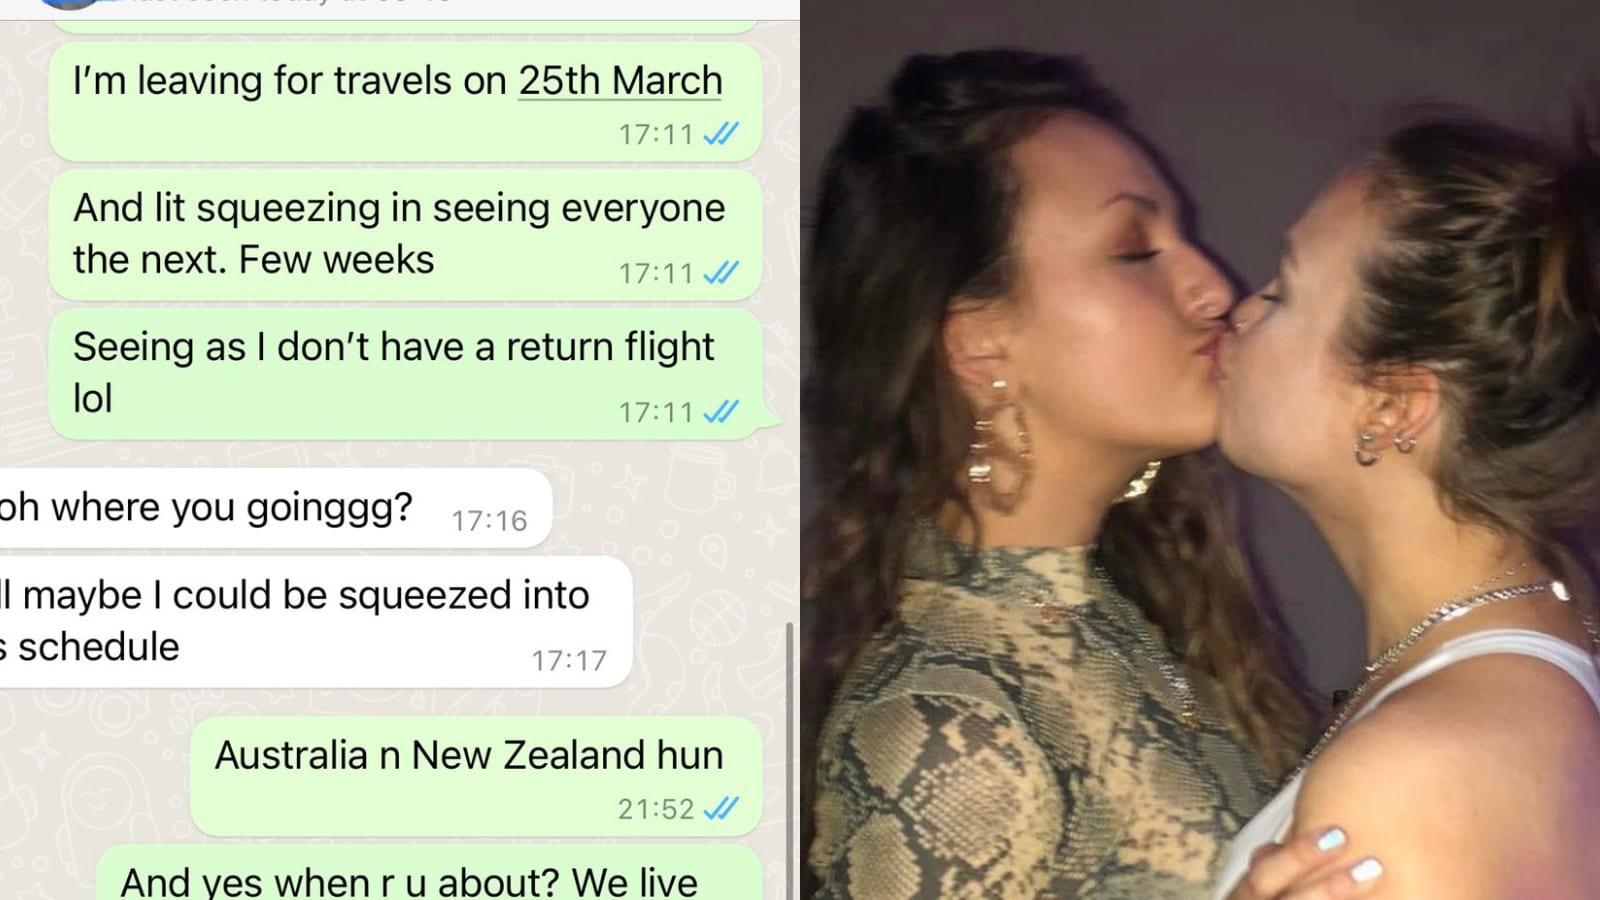 London Woman Shocked at Text from Hinge Date Who Ghosted Her 3 Years Ago